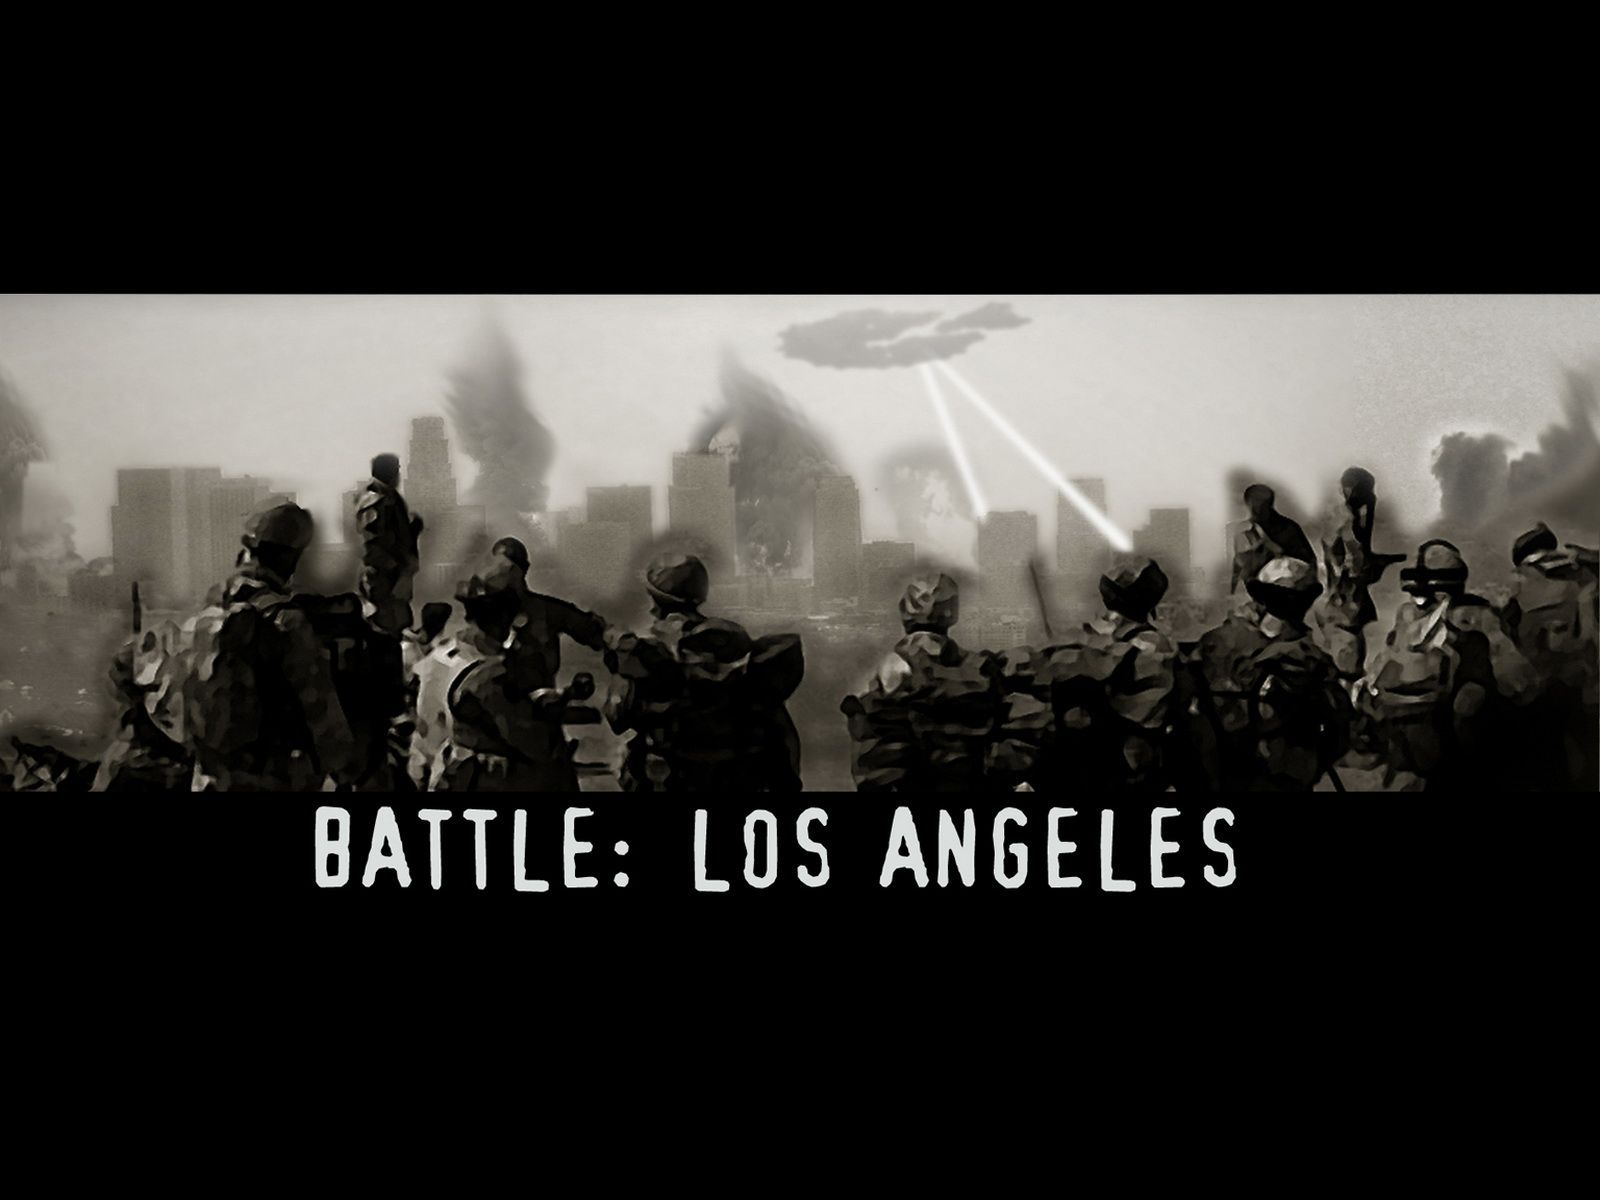 BATTLE LOS ANGELES action sci-fi drama poster apocalyptic s ...